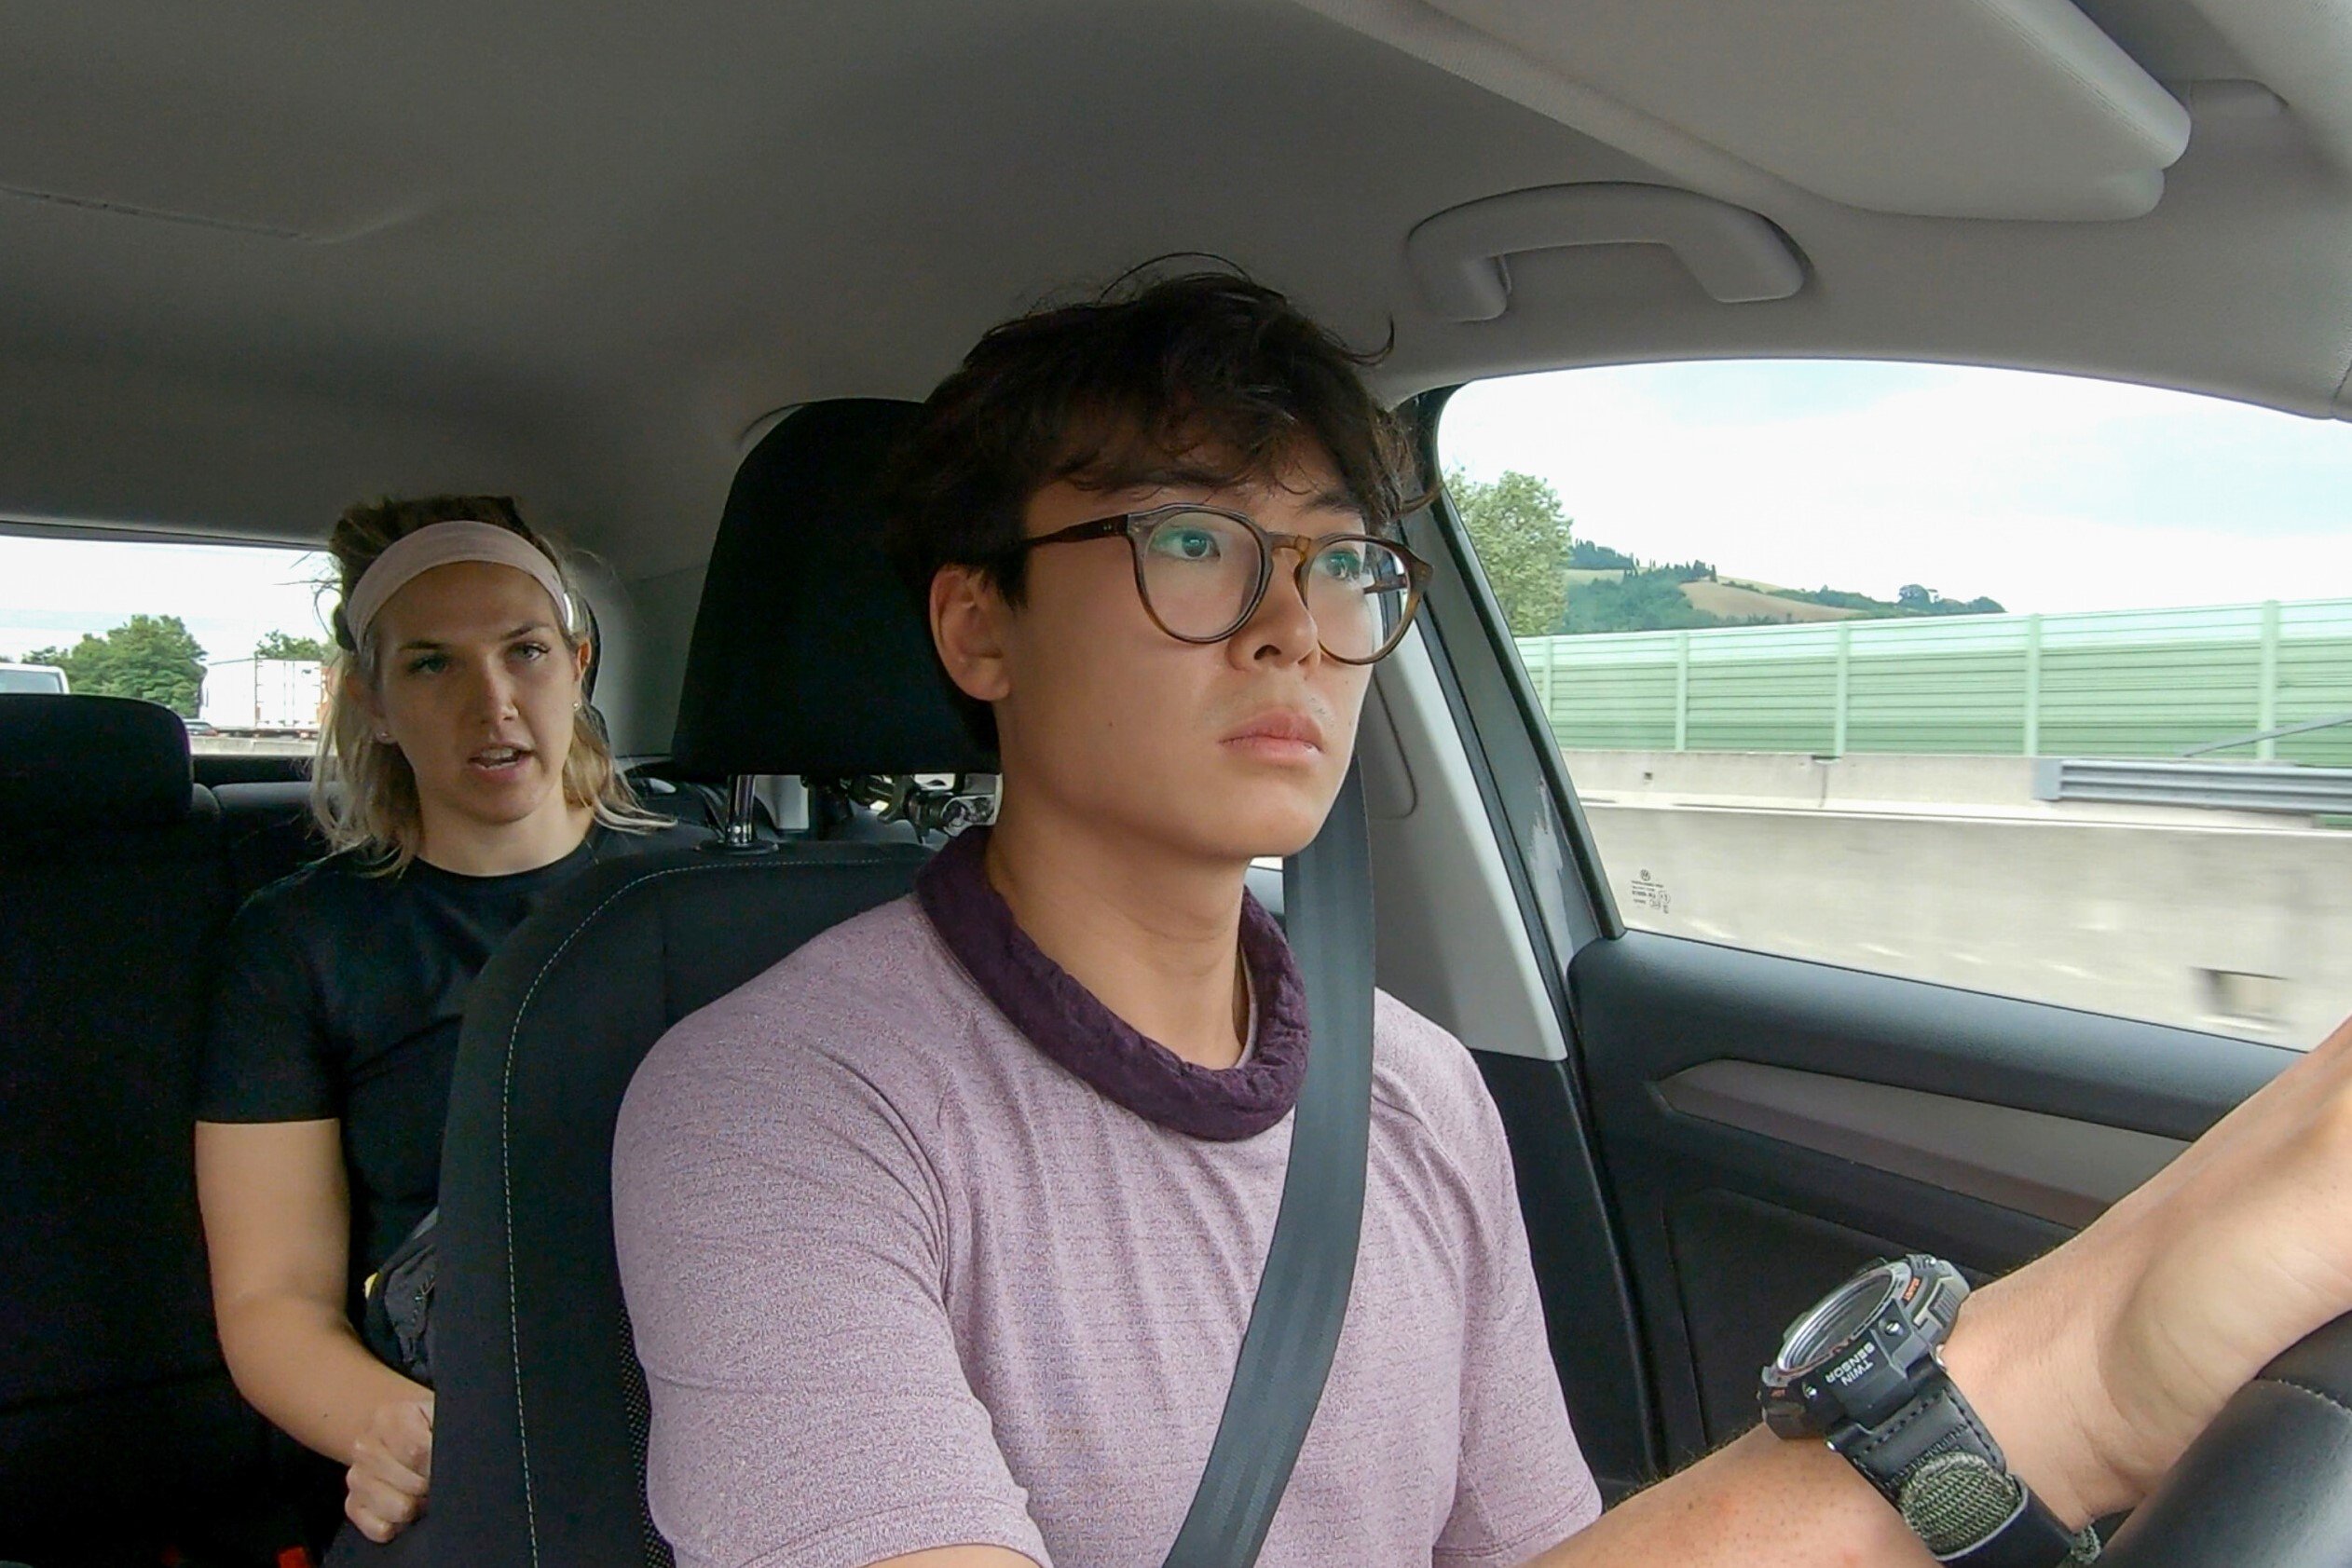 Claire Rehfuss and Derek Xiao, who star in 'The Amazing Race' Season 34, sit in a car with Derek in the driver's seat and Claire in the seat behind him.